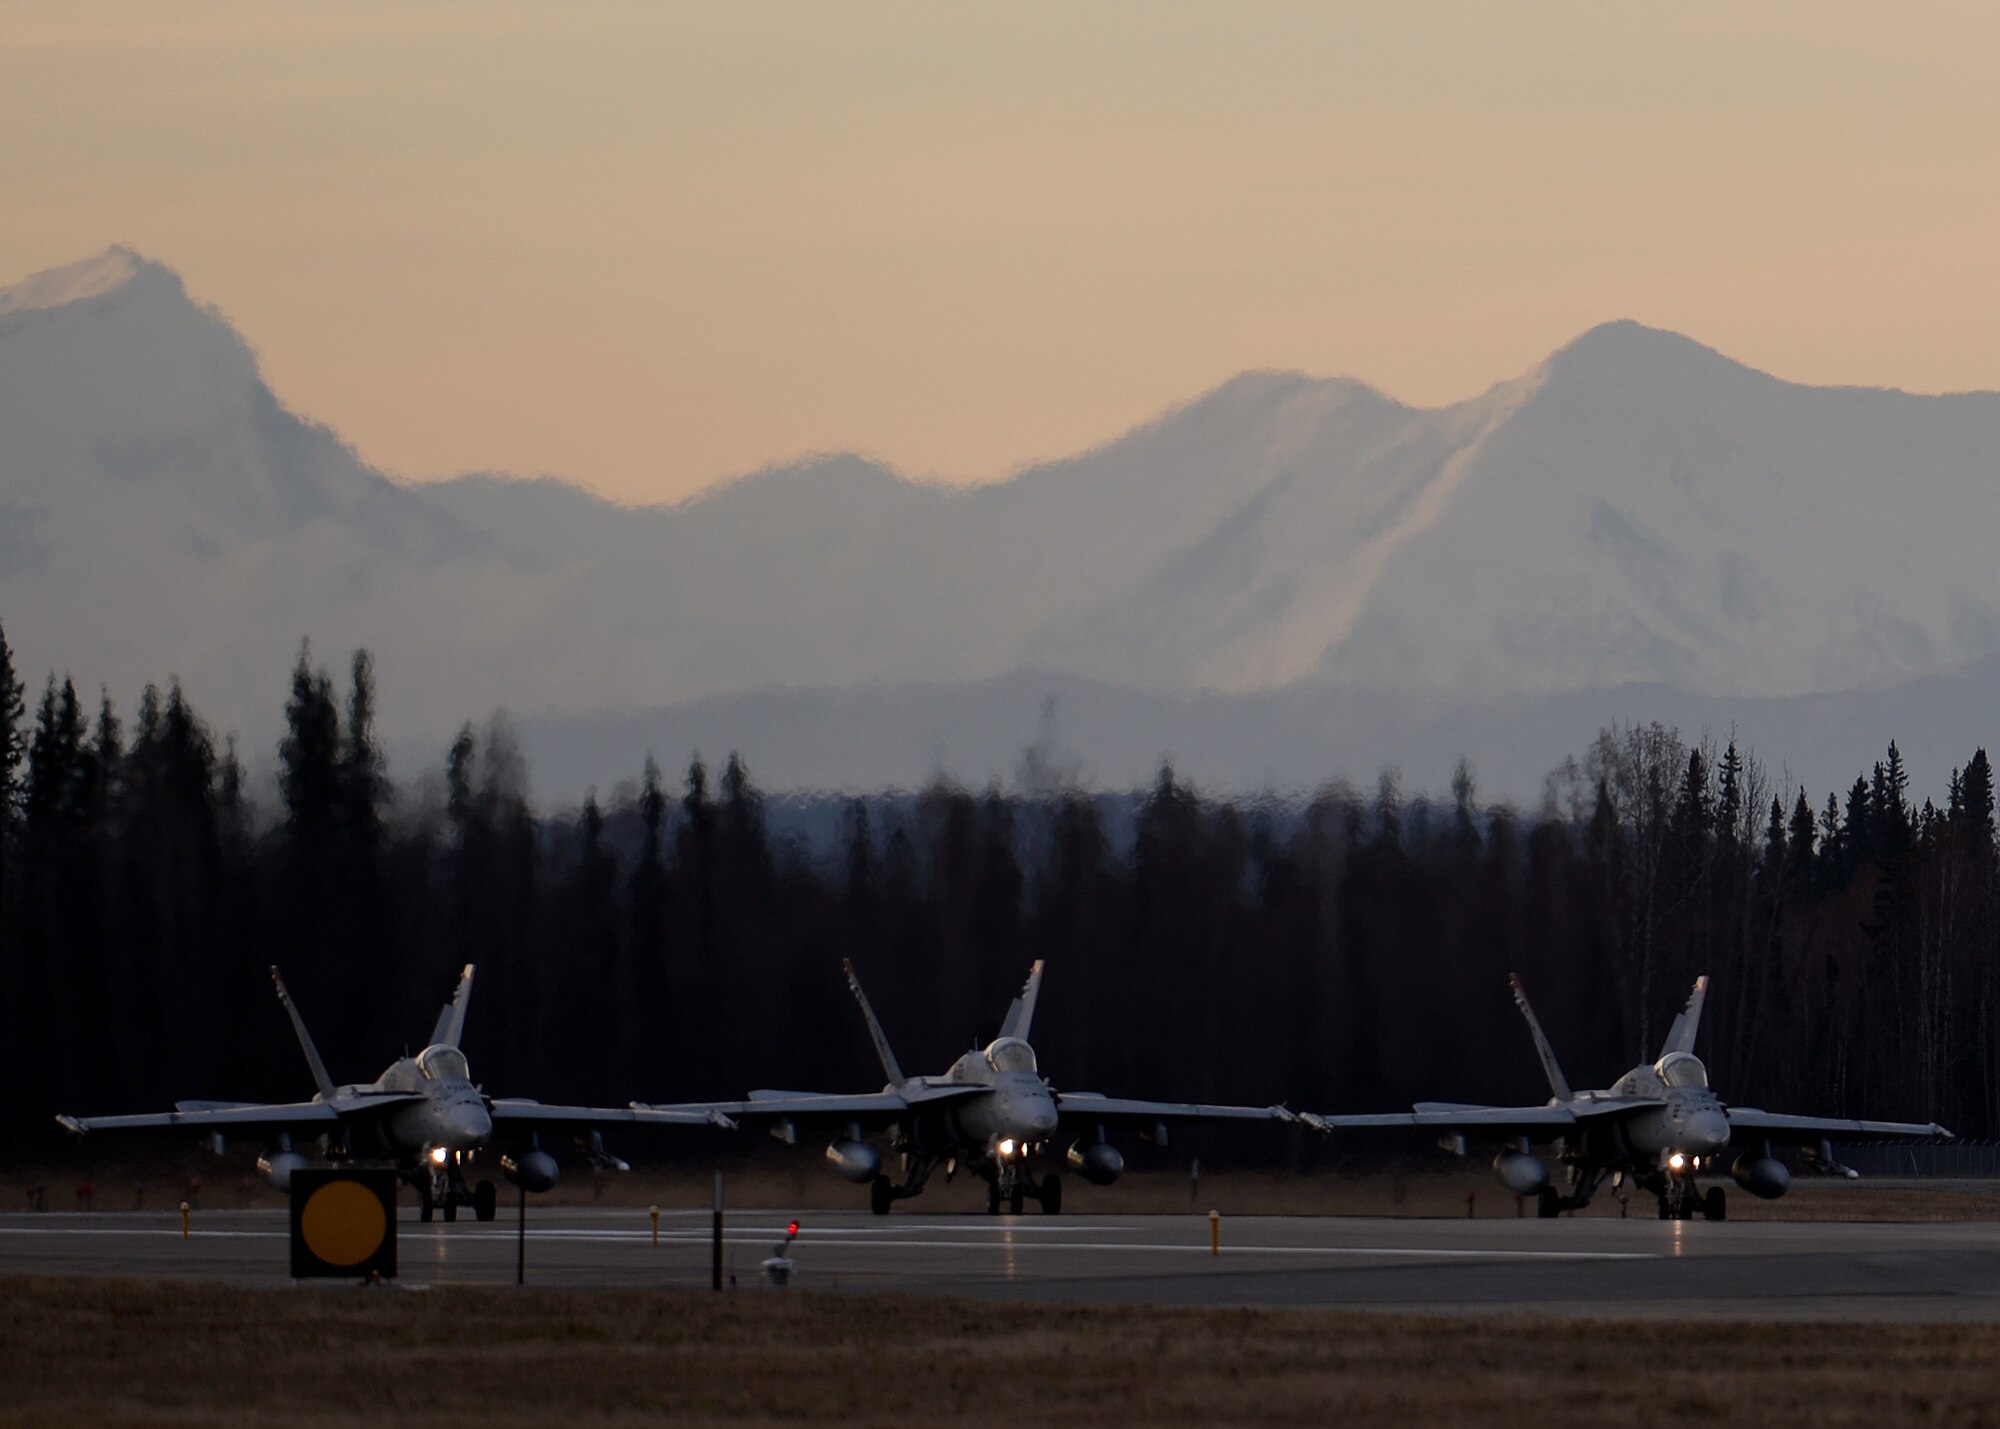 U.S. Marine Corps F/A-18C Hornets assigned to Marine Fighter Attack Squadron (VMFA) 232 out of Marine Corps Air Station Miramar, Calif., line up at the end of the Eielson Air Force Base, Alaska, runway Oct. 10, 2016, for the first combat training mission of RED FLAG-Alaska (RF-A) 17-1. RF-A is a series of Pacific Air Forces commander-directed field training exercises for U.S. and partner nation forces, which enables U.S. Marines in units like VMFA-232 to prepare for future combat and contingency operations in a realistic threat environment inside the largest instrumented air, ground and electronic combat training range in the world. (U.S. Air Force photo by Master Sgt. Karen J. Tomasik)